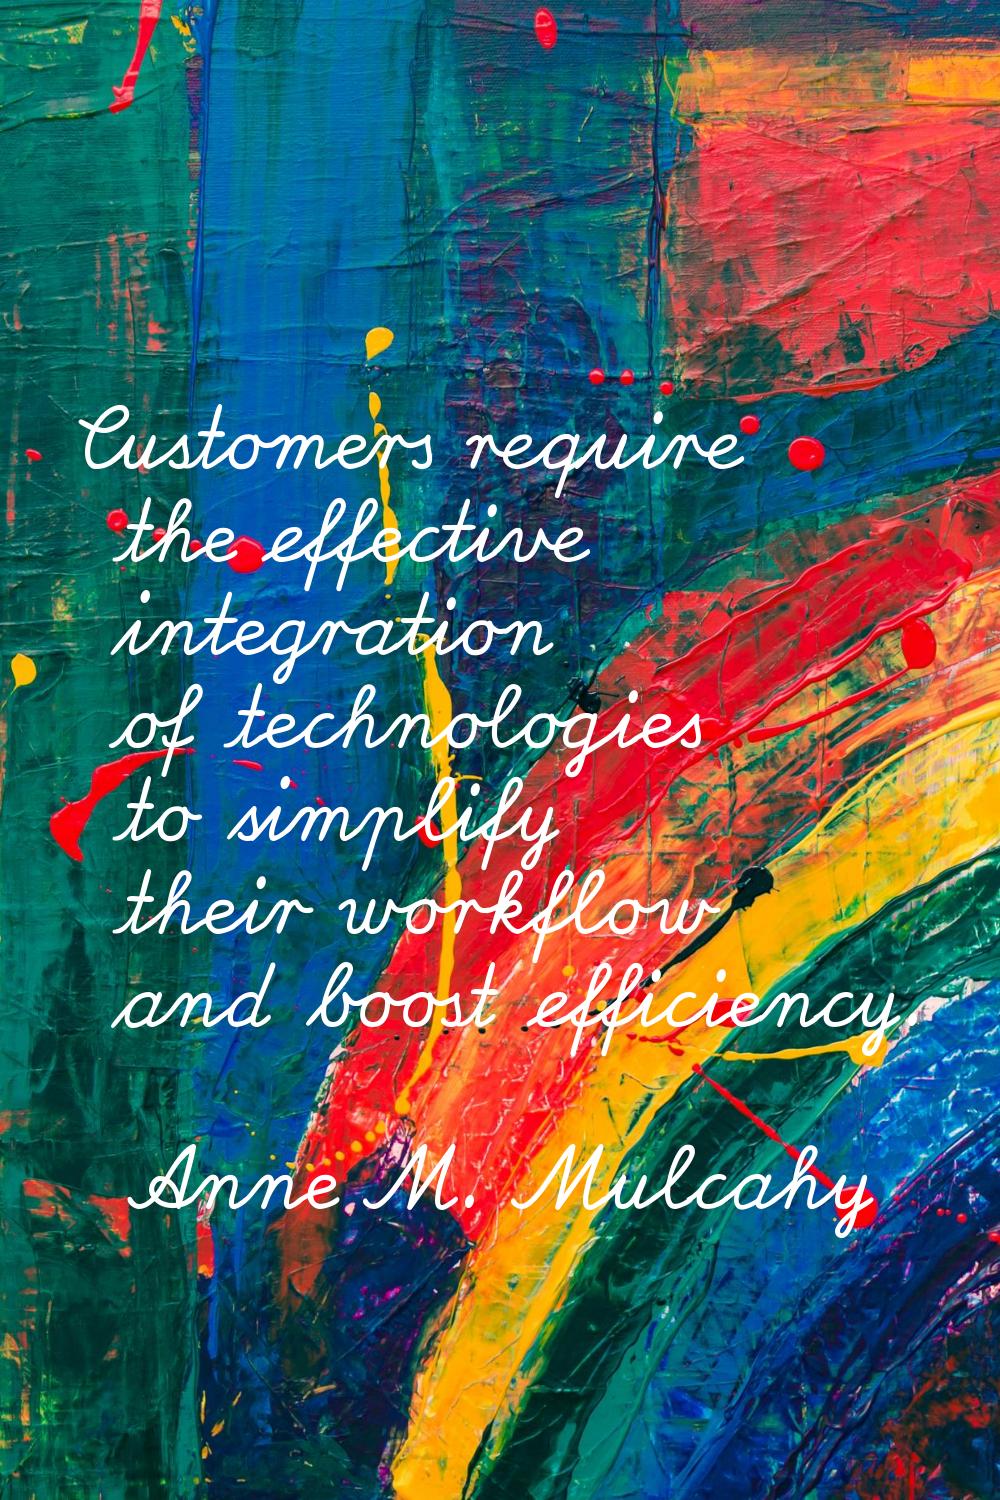 Customers require the effective integration of technologies to simplify their workflow and boost ef